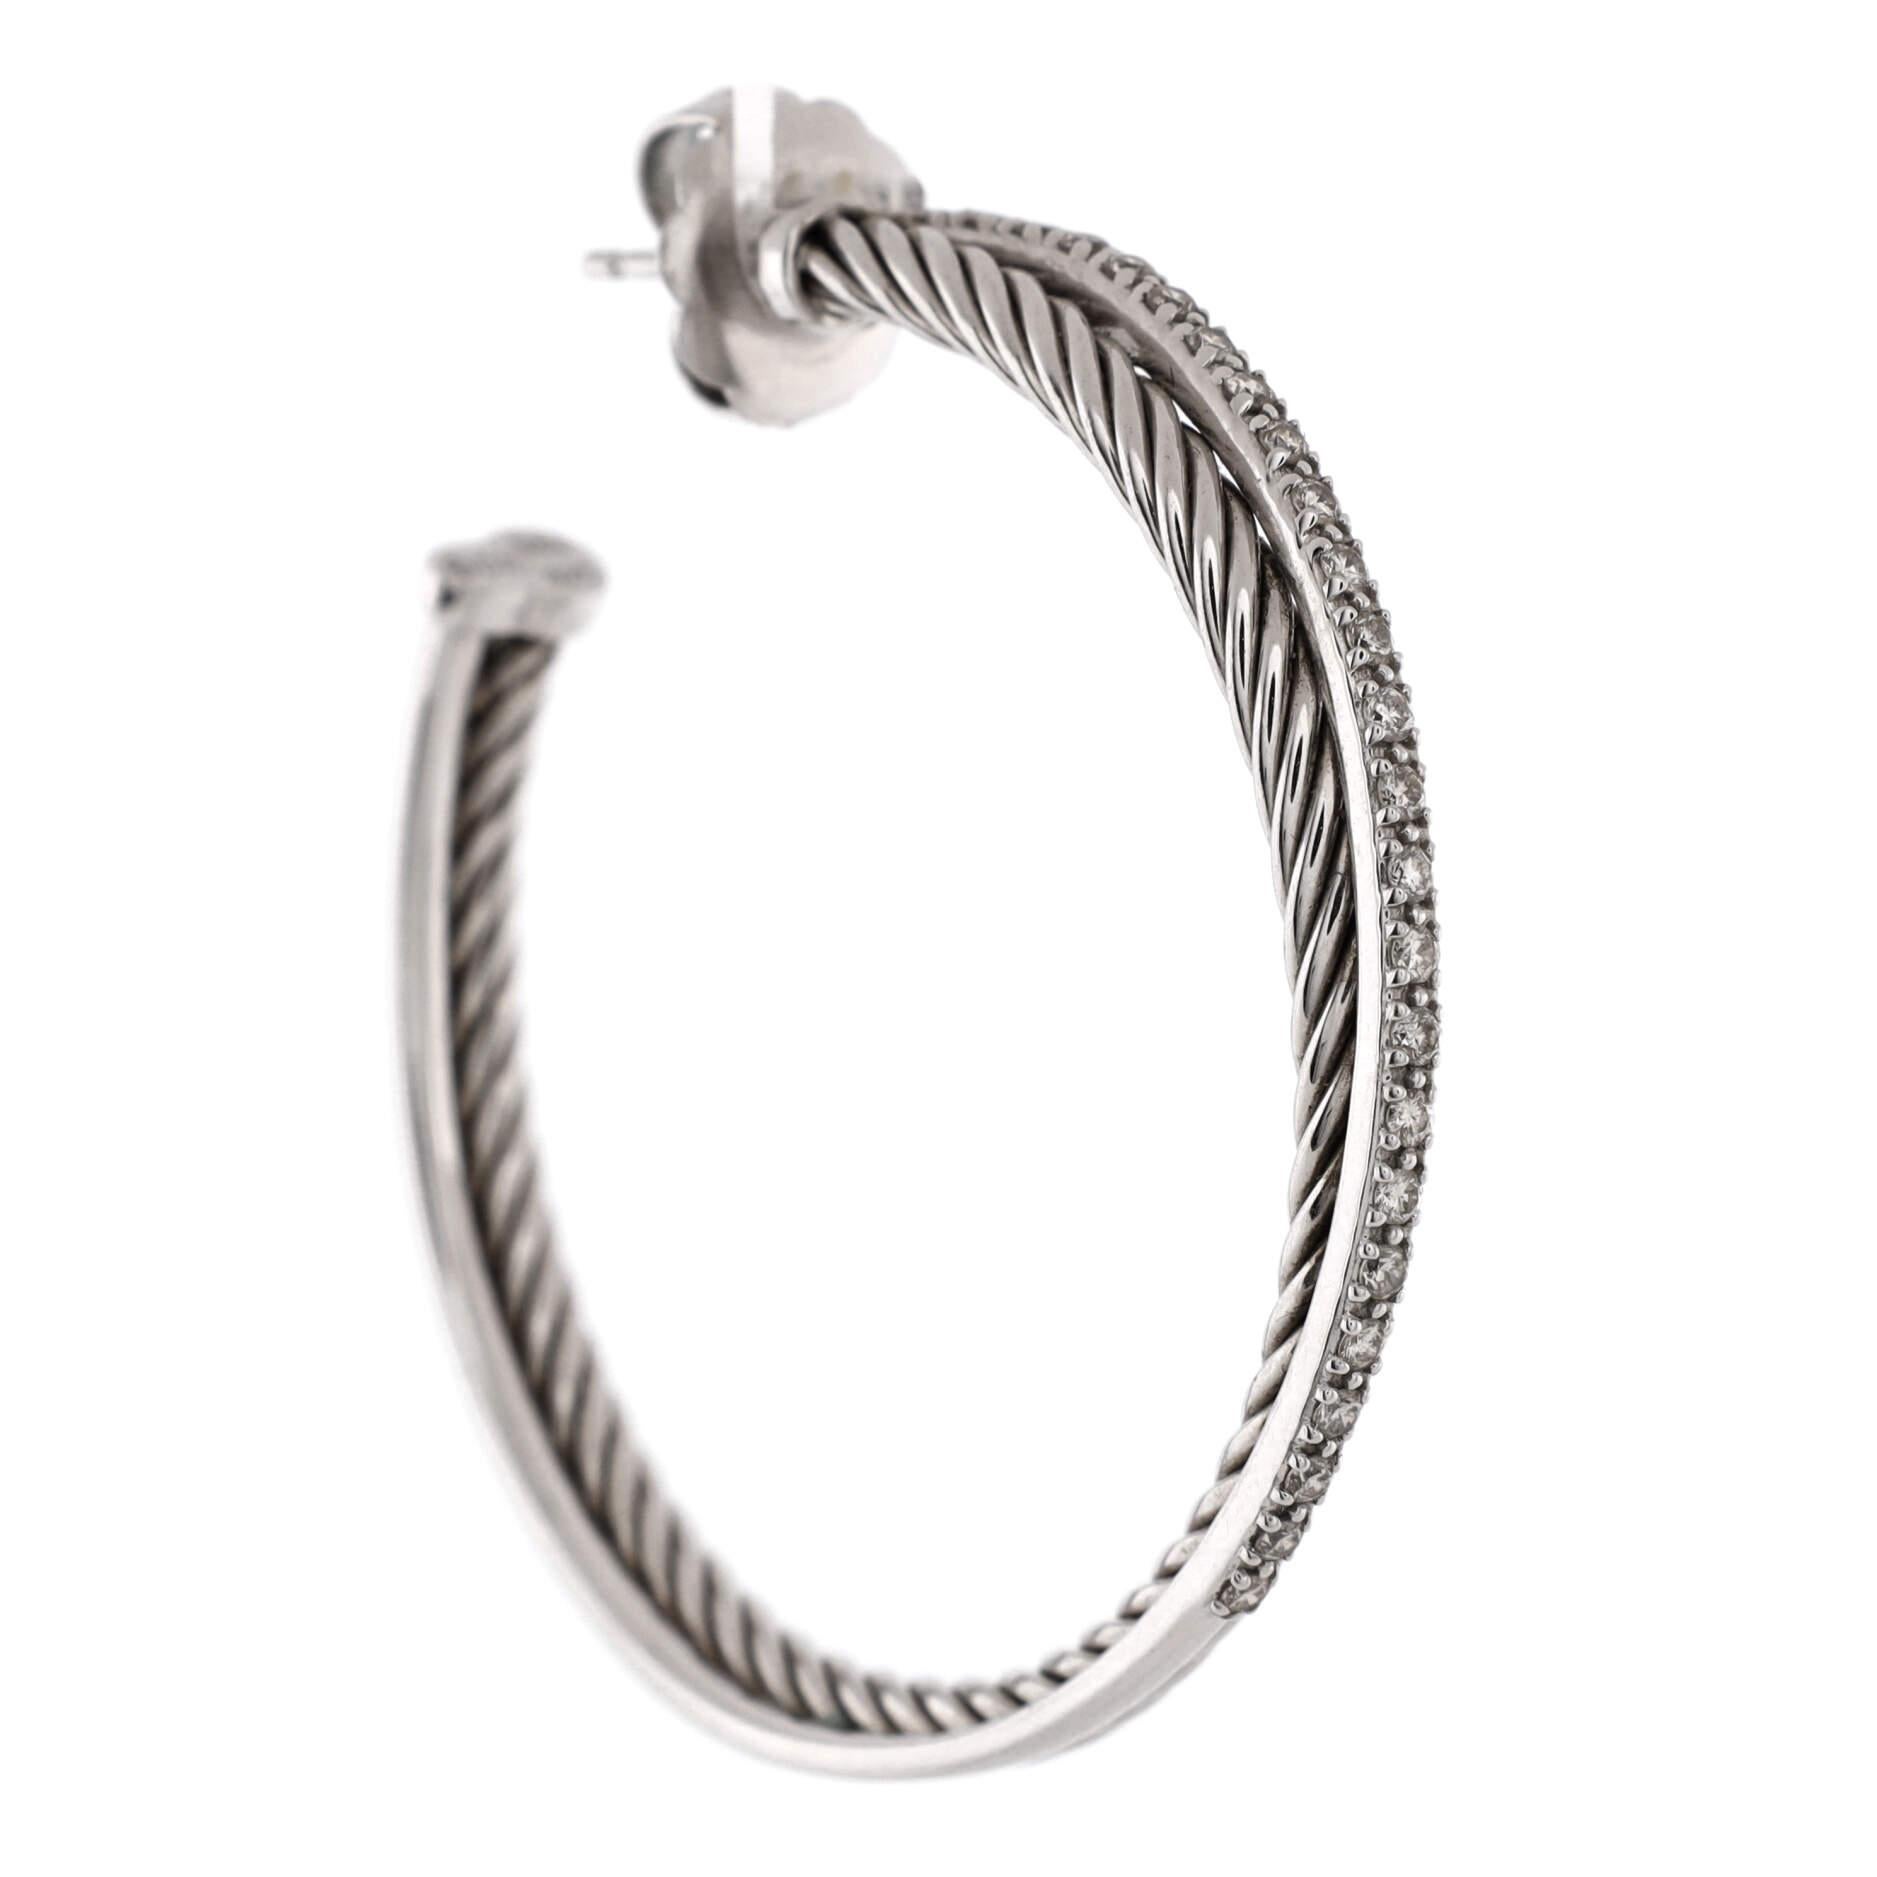 Condition: Very good. Moderate wear throughout.
Accessories: No Accessories
Measurements: Height/Length: 44.00 mm, Width: 4.00 mm
Designer: David Yurman
Model: Crossover Hoop Earrings Sterling Silver and Diamonds 44mm
Exterior Color: Silver
Item